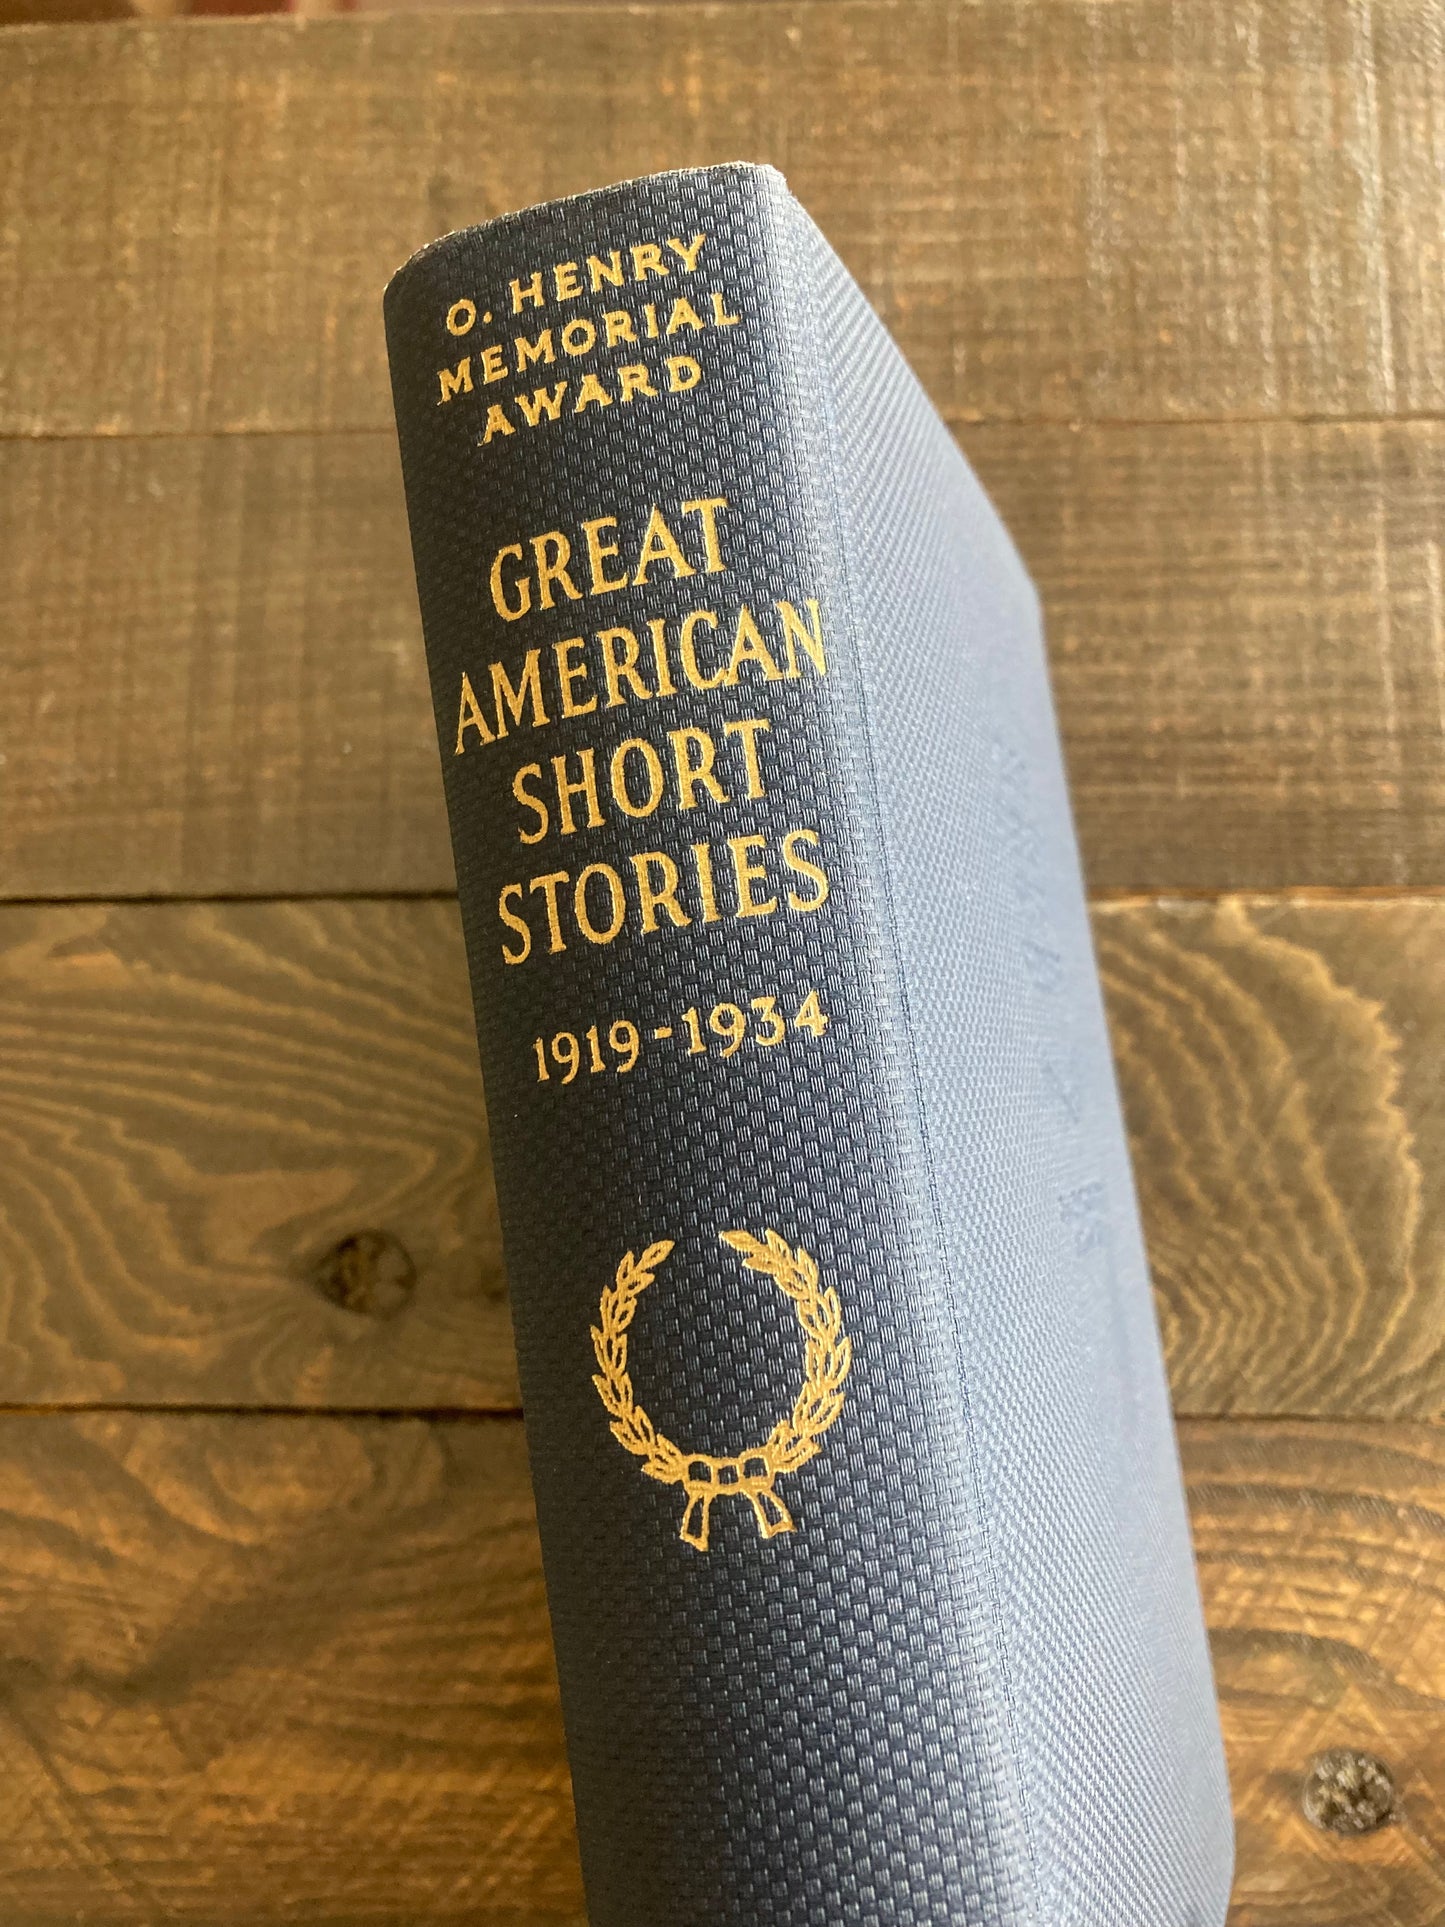 Great American Short Stories from 1919-1934